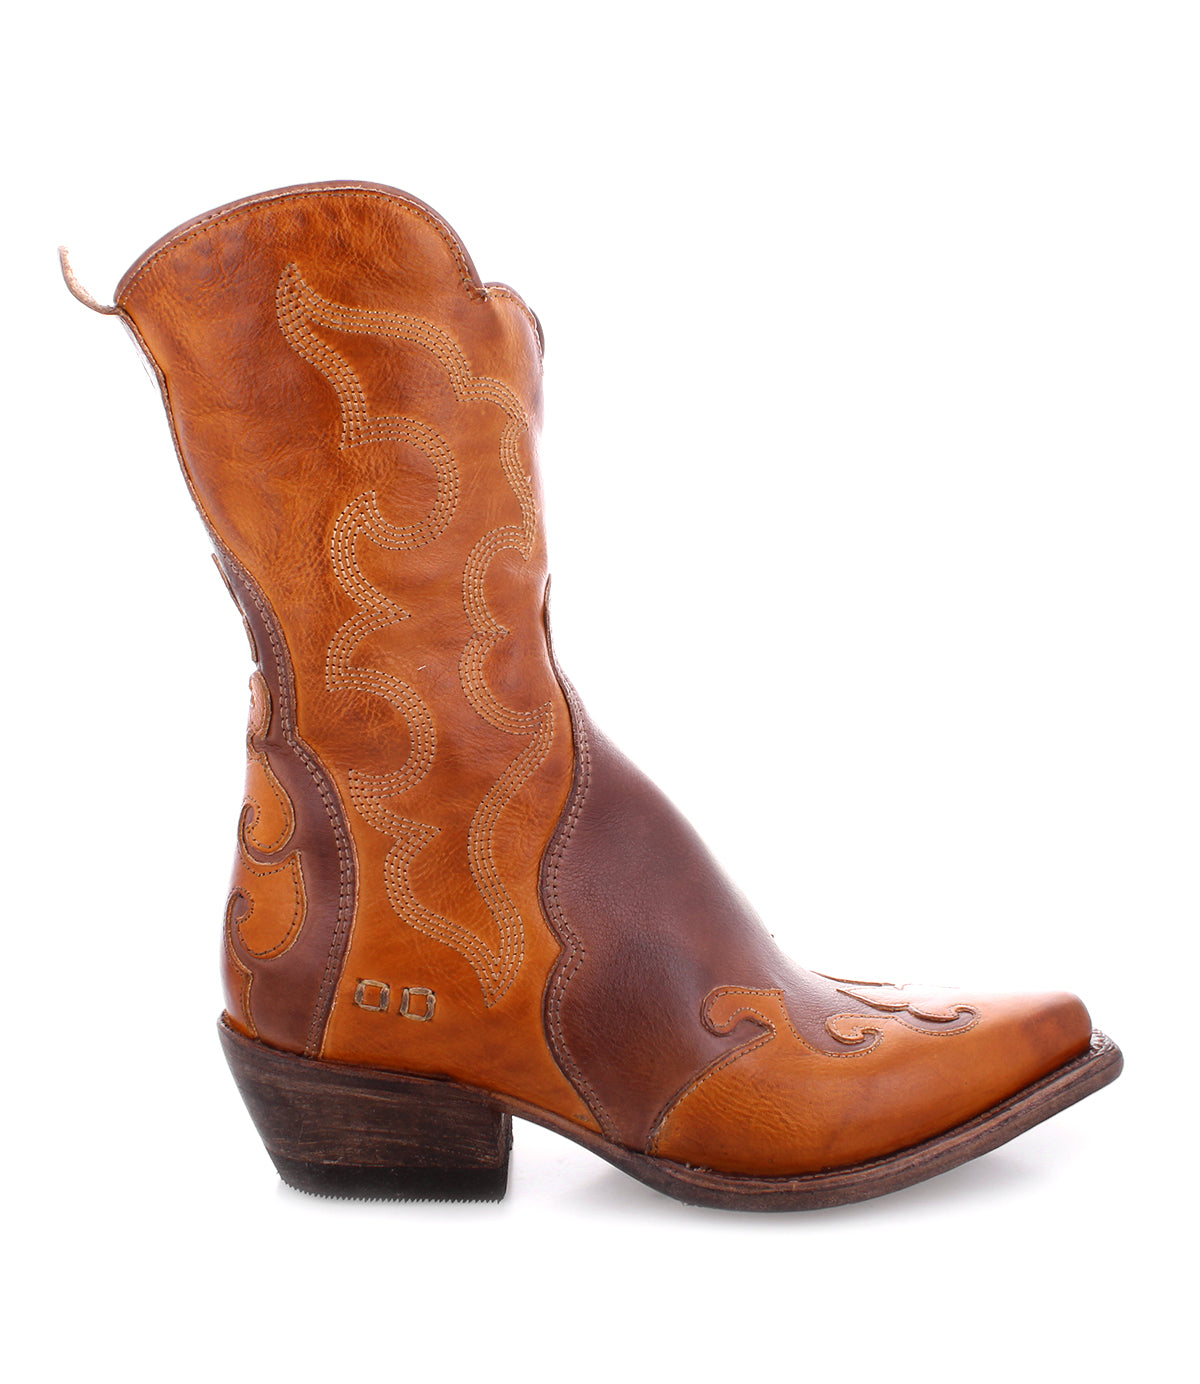 A women's Deuce cowboy boot in tan leather with western style by Bed Stu.